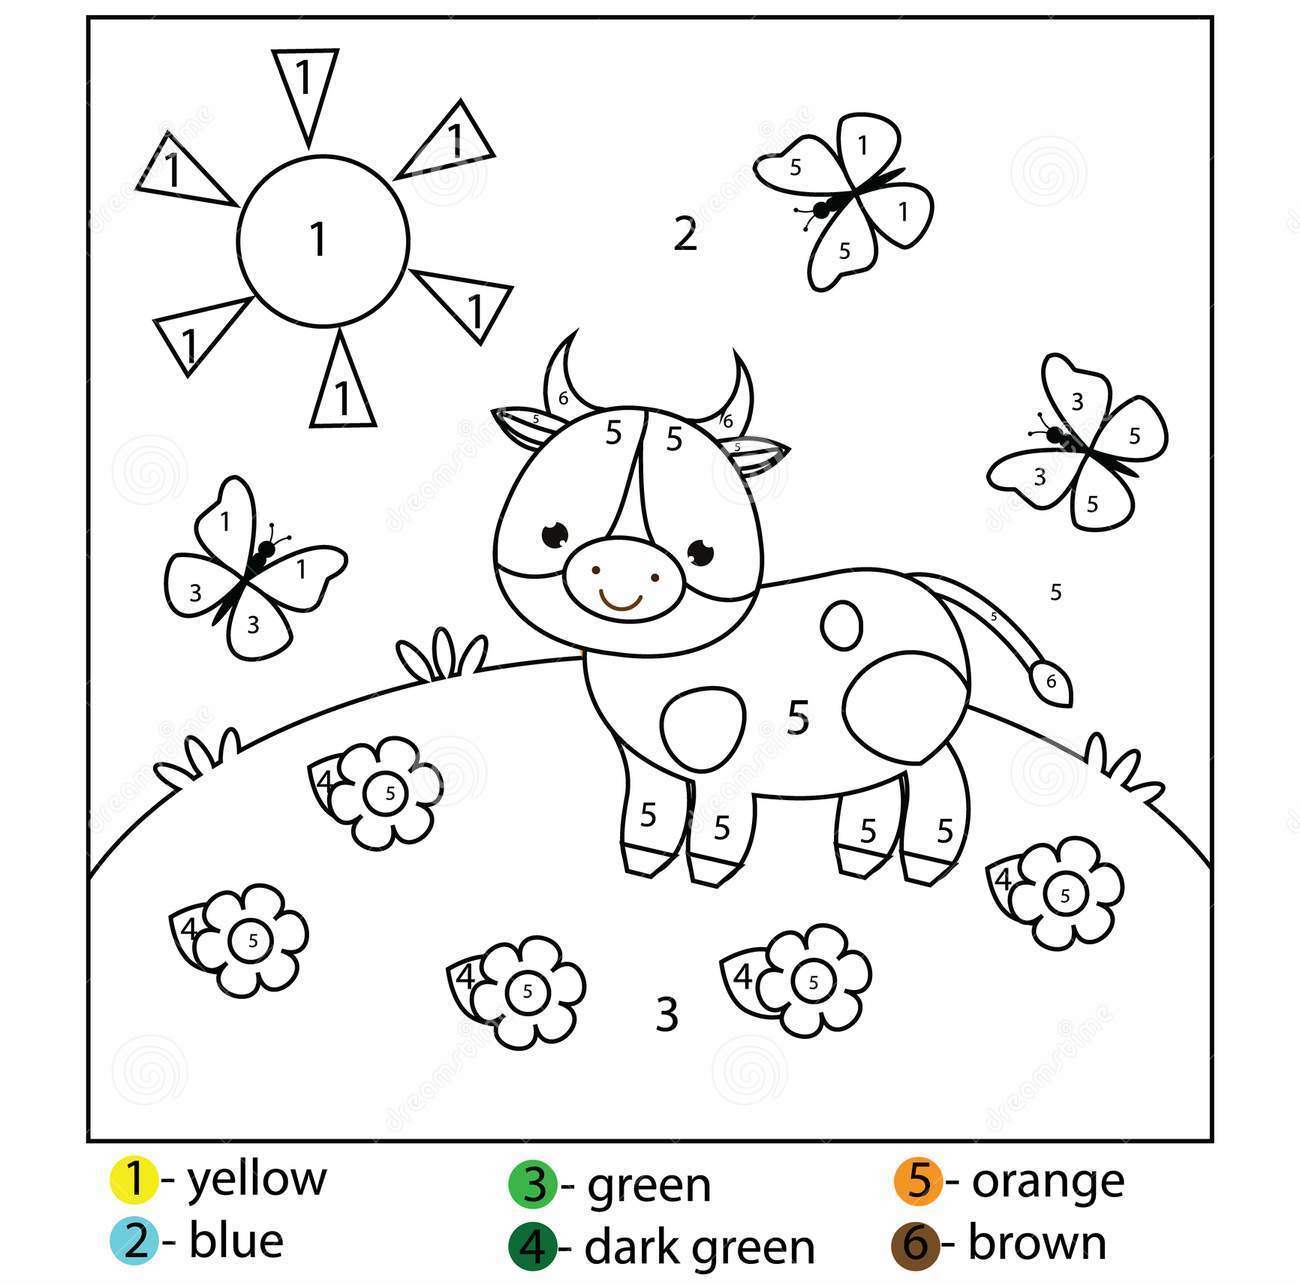 educational-game-kids-toddlers-color-numbers-printable-worksheet-children-coloring-page-cow-animals-theme-110827335.jpg